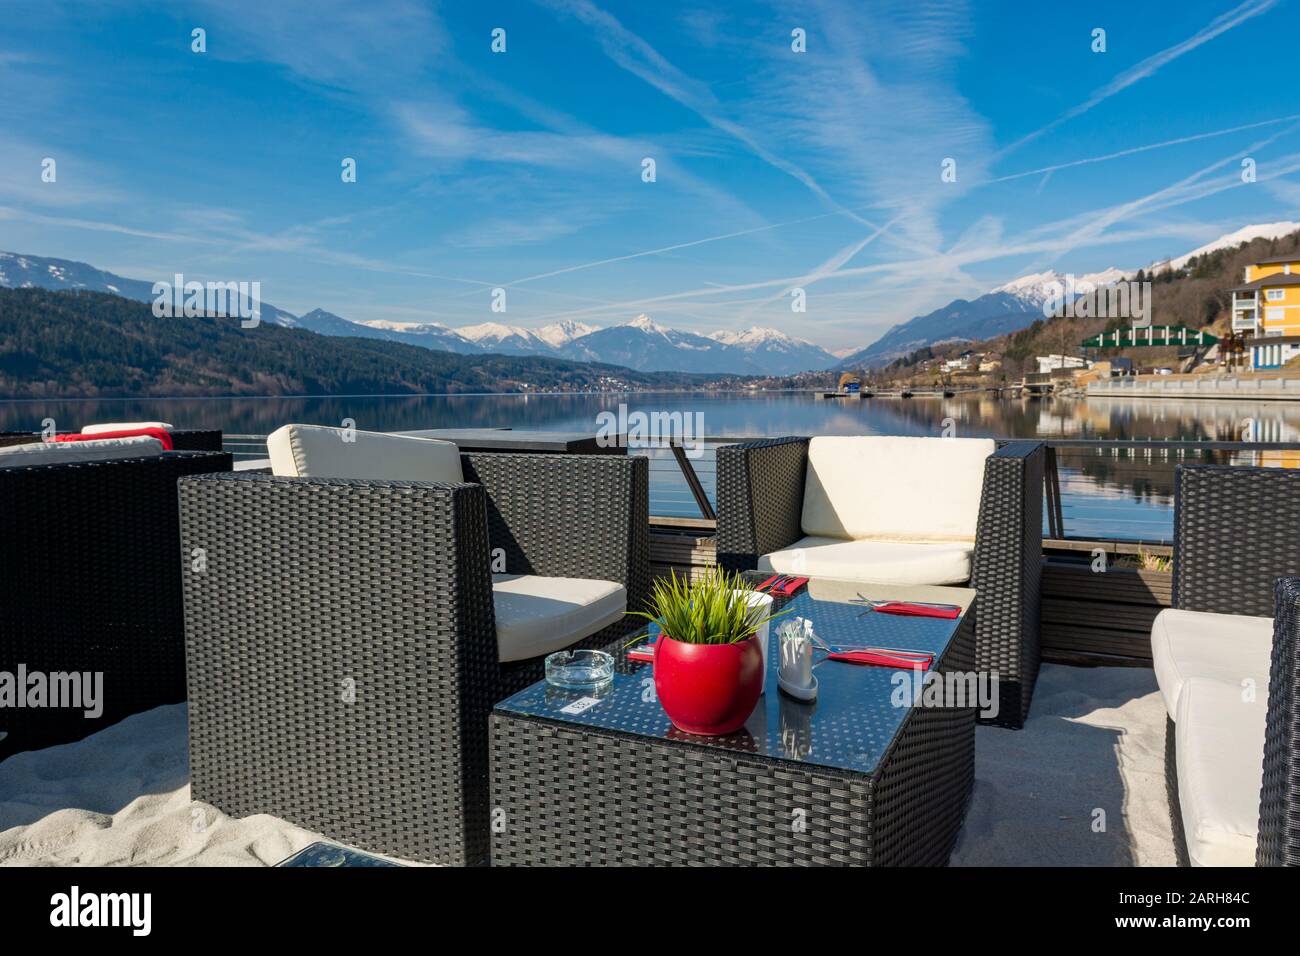 Luxury lake resort with spectacular mountain view. Stock Photo